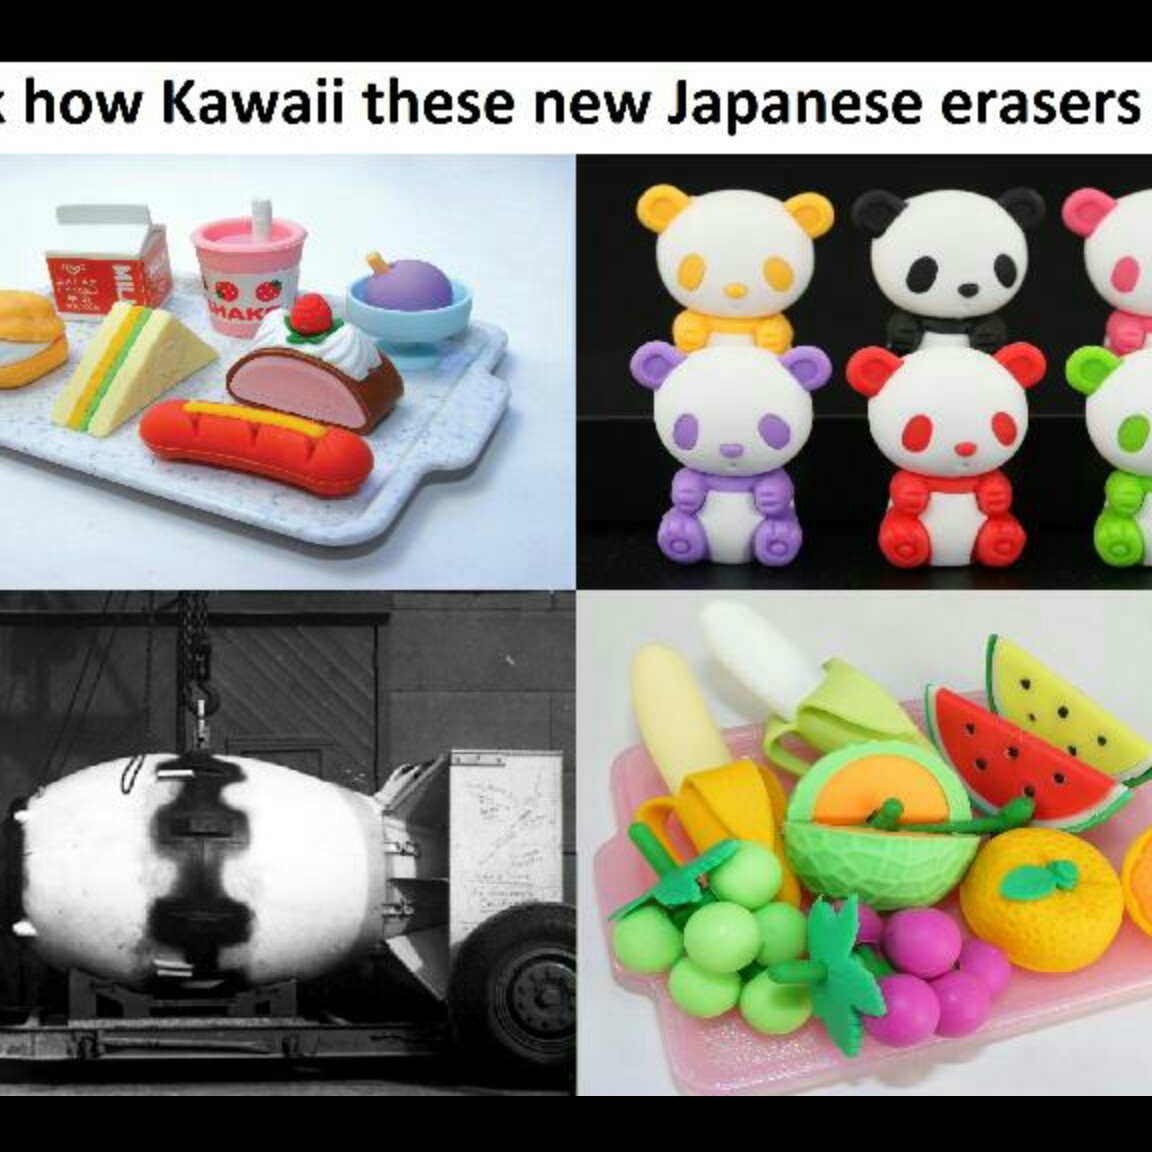 Its true, this erasers are awesome - meme